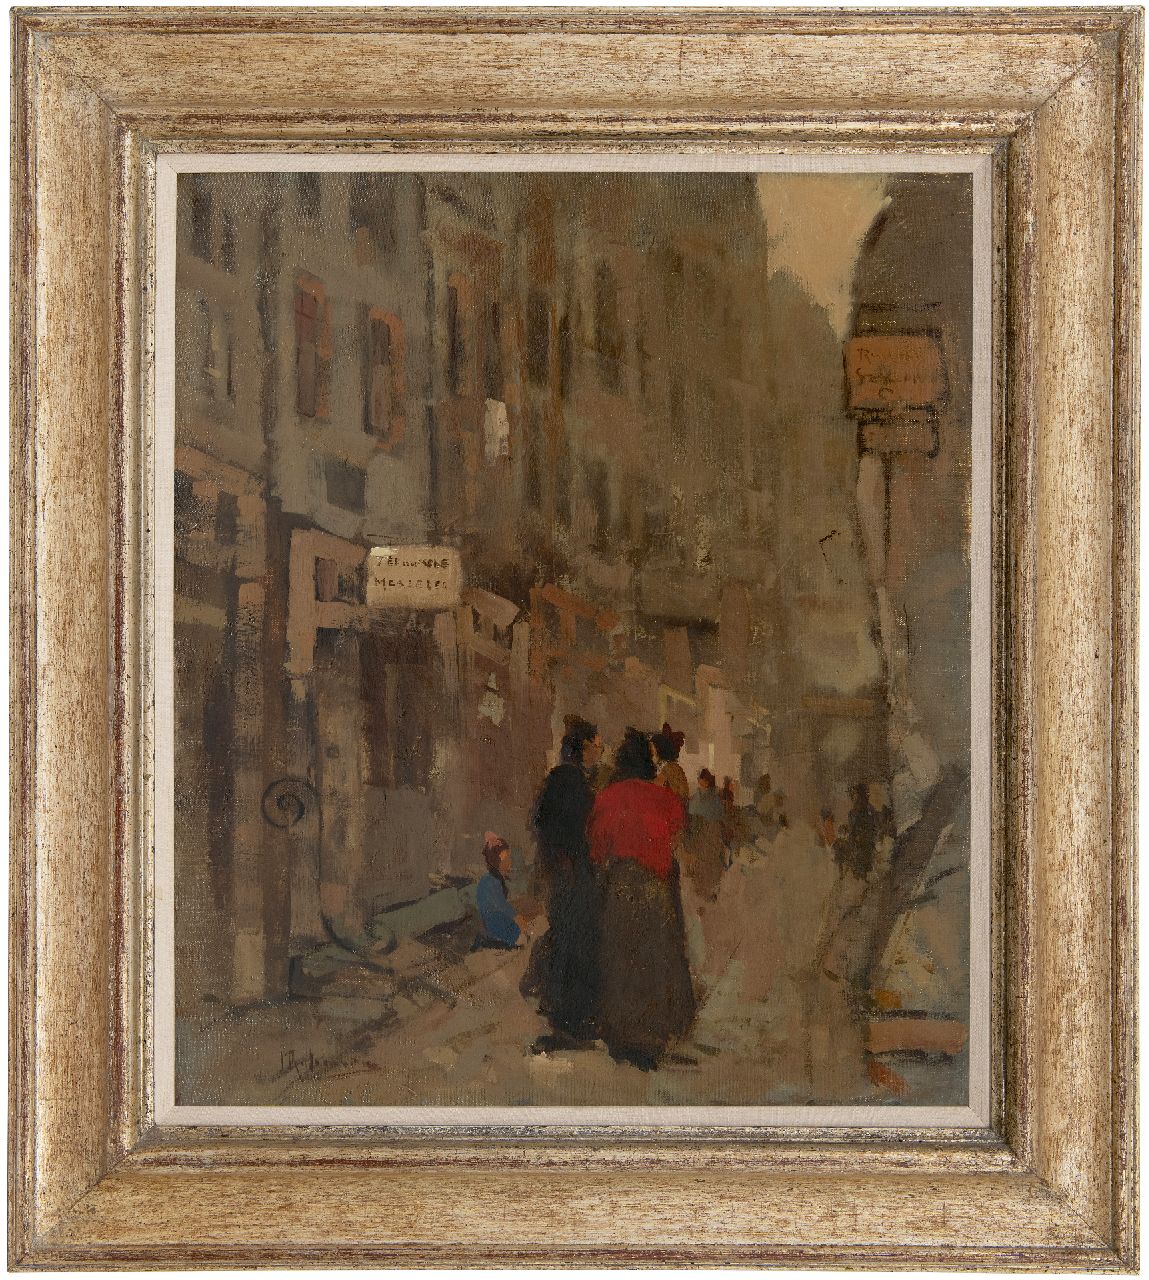 Rijlaarsdam J.  | Jan Rijlaarsdam | Paintings offered for sale | Street with figures, oil on canvas 60.3 x 51.4 cm, signed l.l.